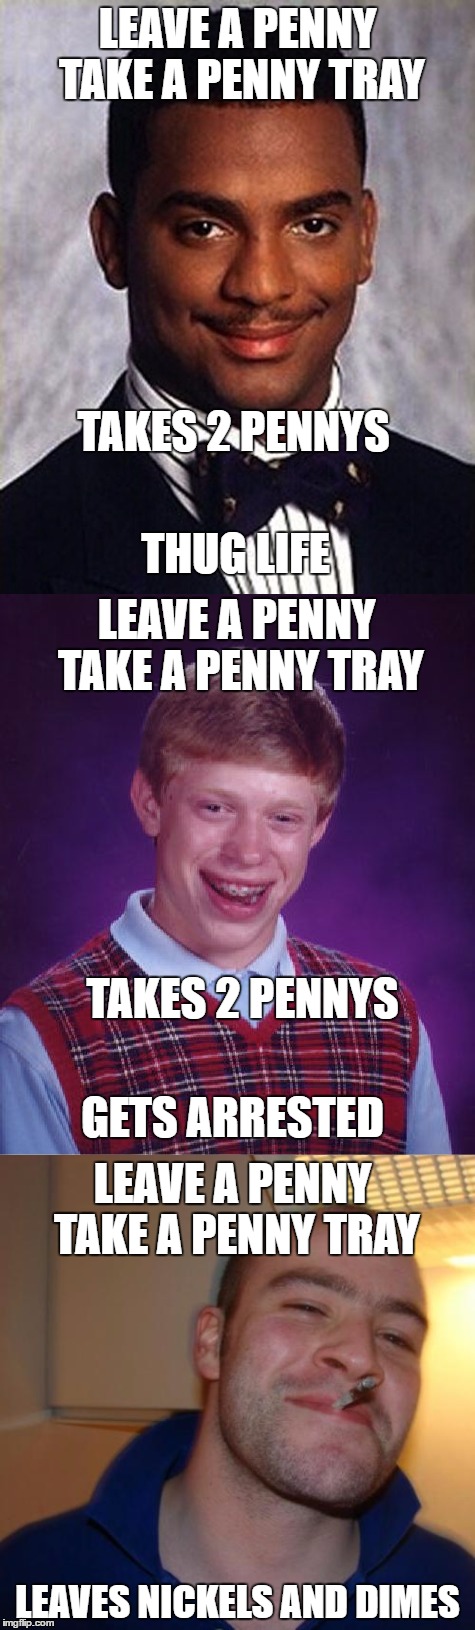 leave a penny take a penny tray trilogy all in one deluxe meme. | LEAVE A PENNY TAKE A PENNY TRAY; TAKES 2 PENNYS; THUG LIFE; LEAVE A PENNY TAKE A PENNY TRAY; TAKES 2 PENNYS; GETS ARRESTED; LEAVE A PENNY TAKE A PENNY TRAY; LEAVES NICKELS AND DIMES | image tagged in carlton banks thug life,bad luck brian,good guy greg | made w/ Imgflip meme maker